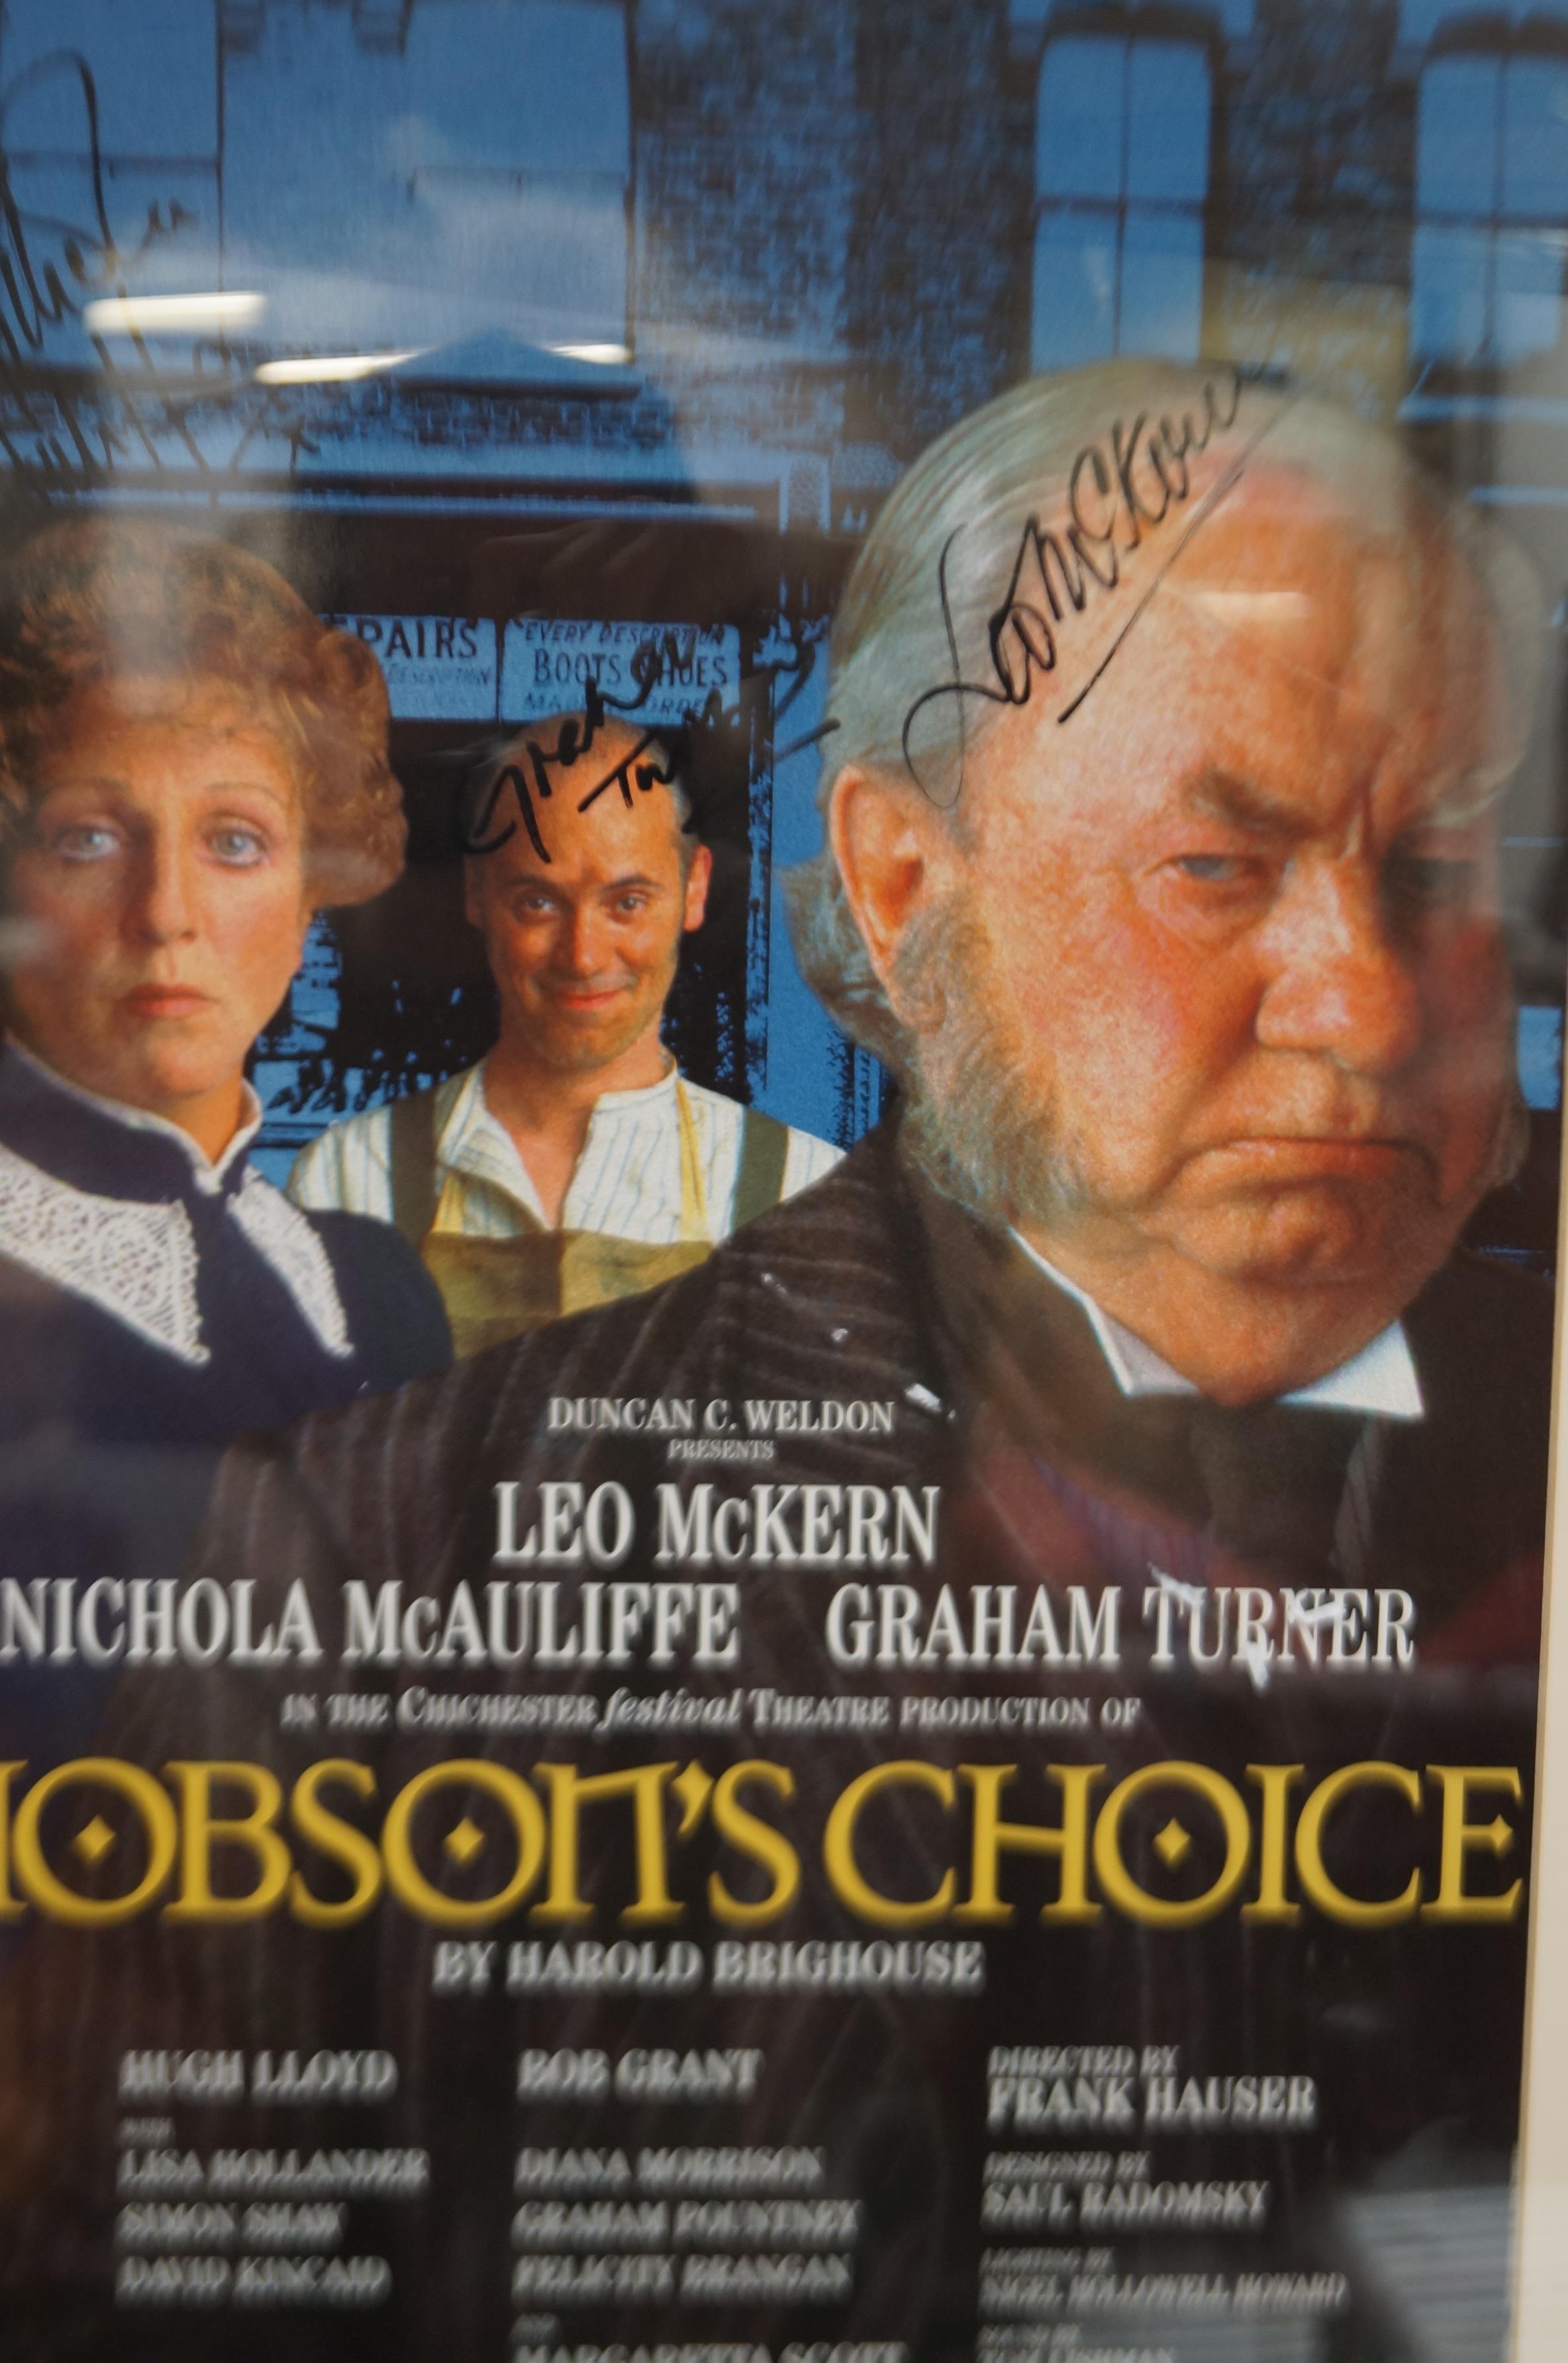 Hobsons choice signed theatre poster by Leo mckern